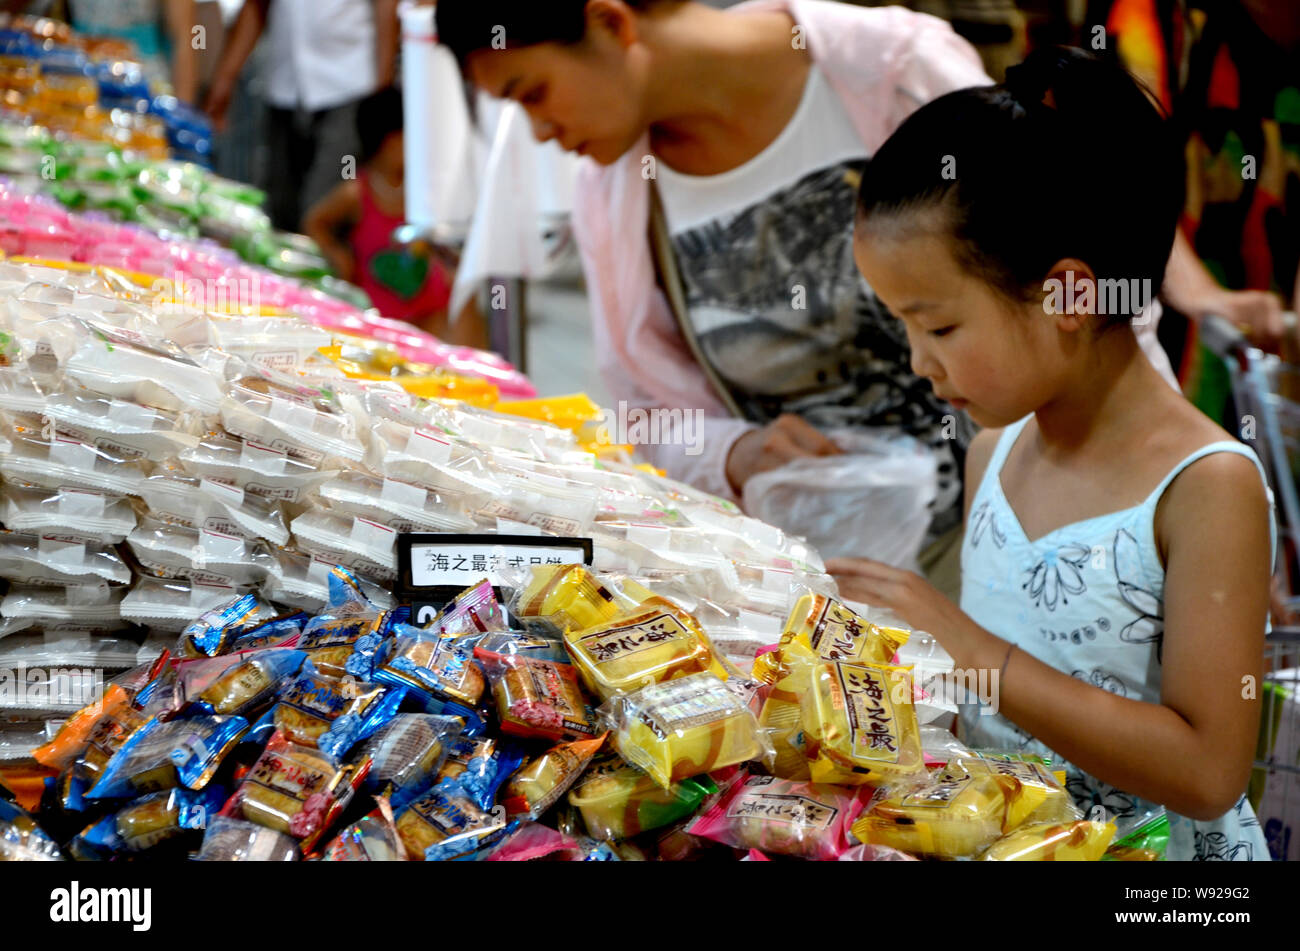 Customers shop for mooncakes at a store in Xuchang city, central Chinas Henan province, 22 August 2013.   First baijiu, then red carpets, and now moon Stock Photo